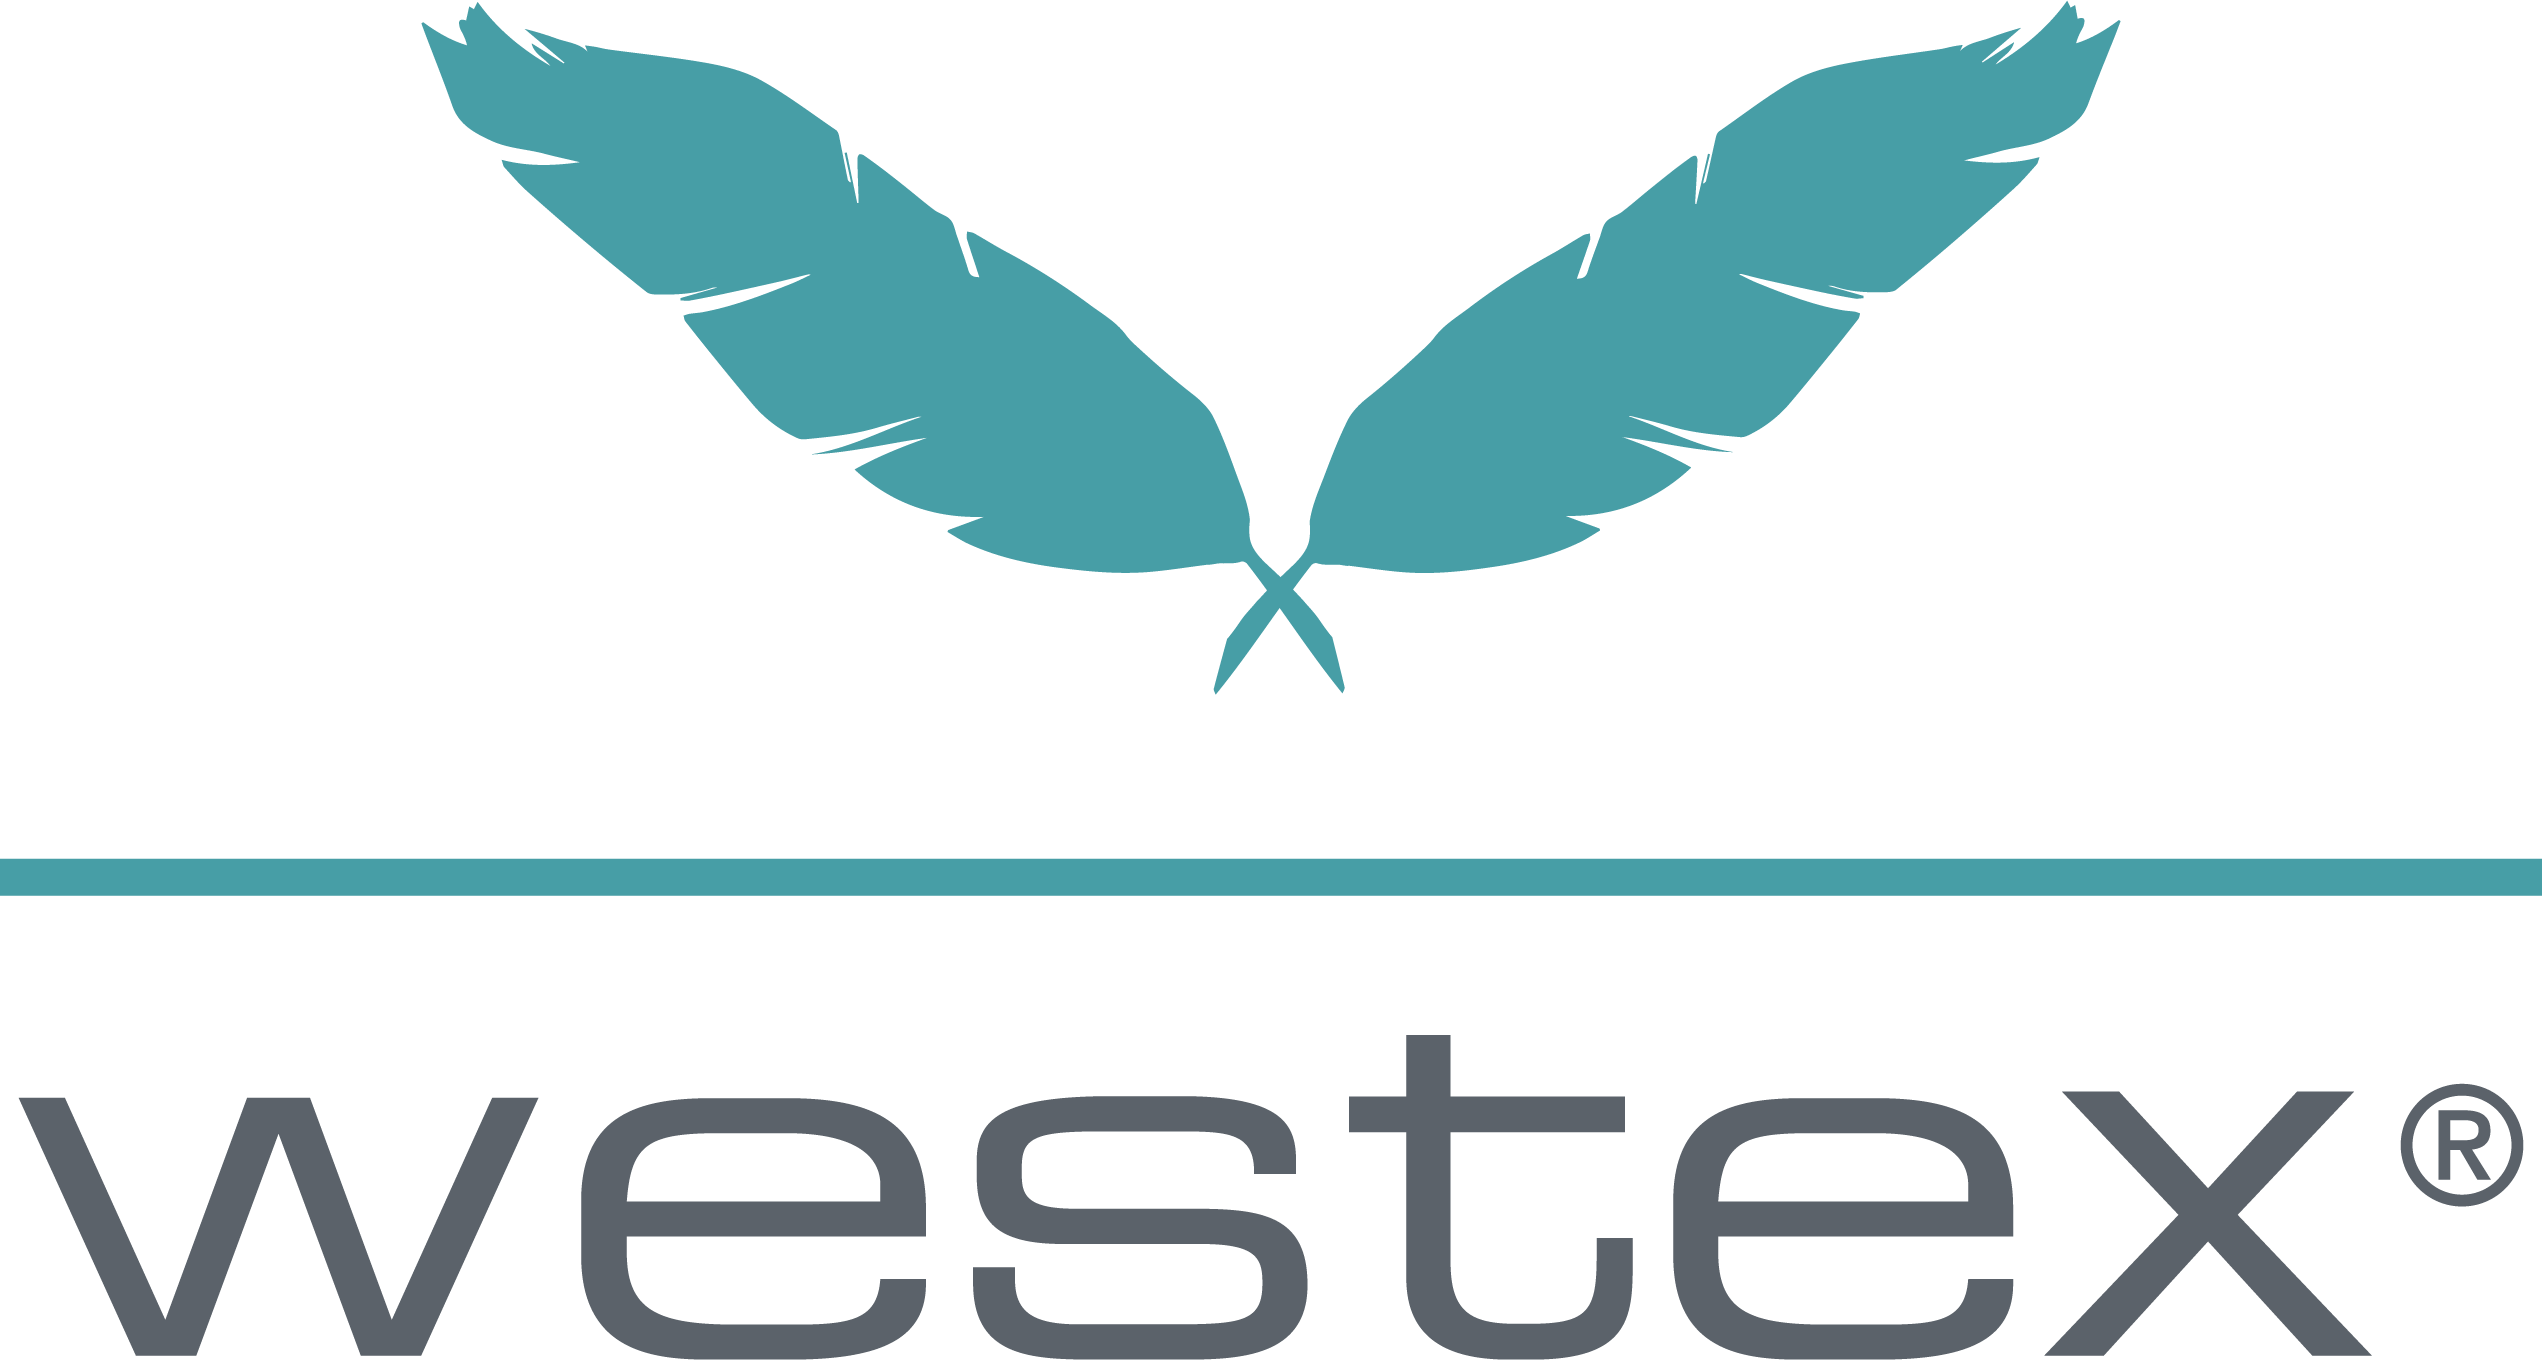 Westex is a Canadian manufacturer of bedding and home fashion products based in Ontario, Canada.